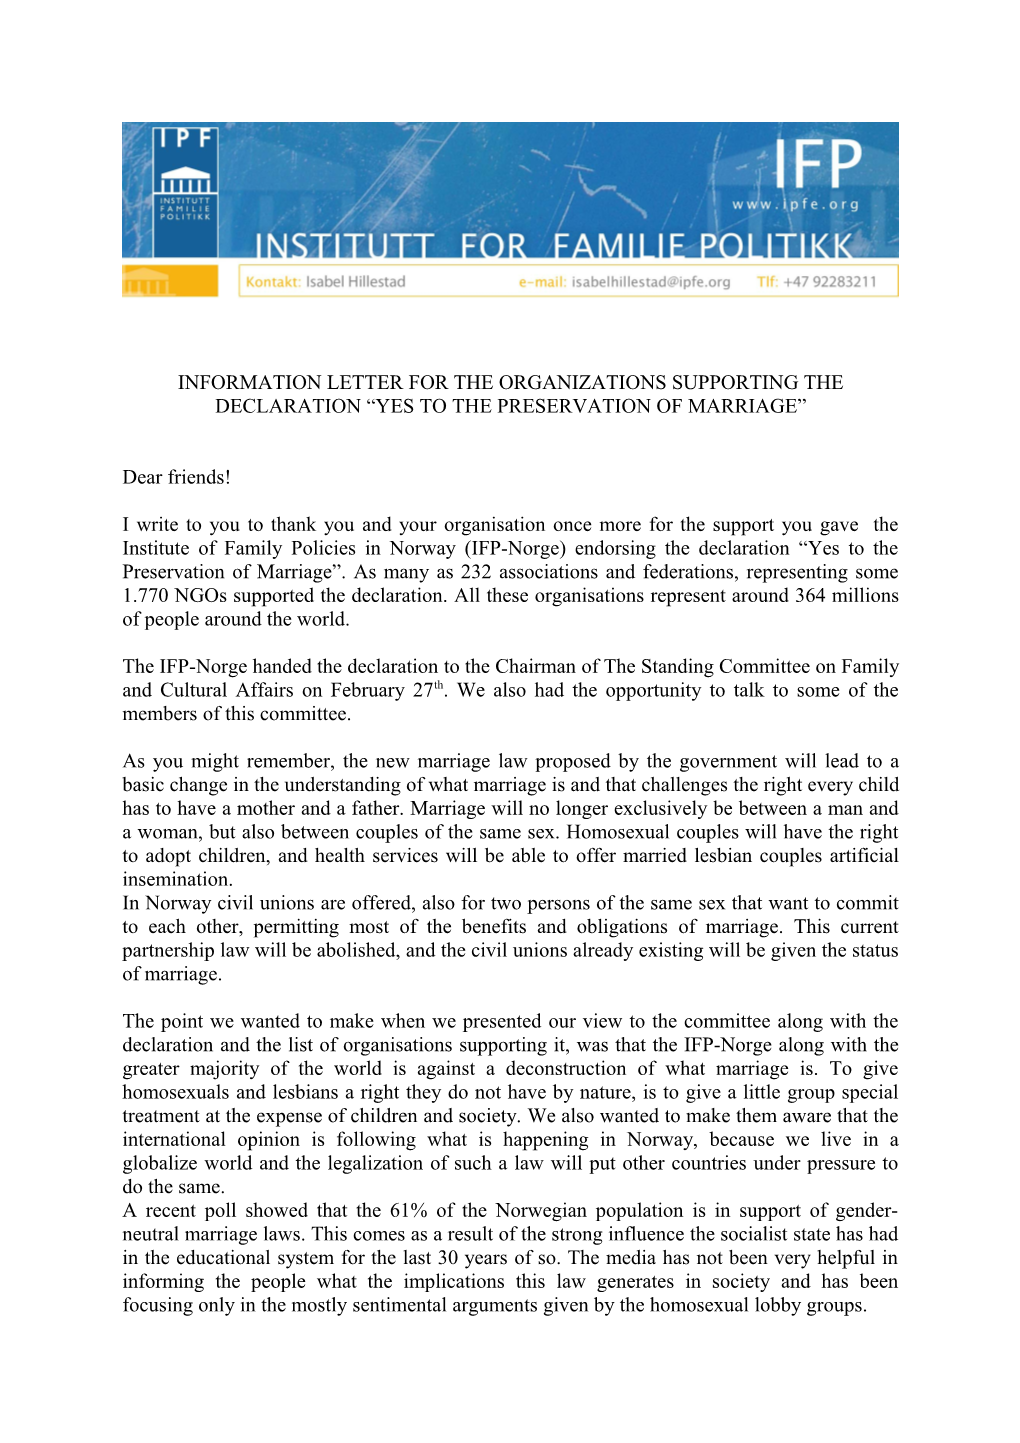 Information Letter for the Organizations Supporting the Declaration Yes to the Preservation